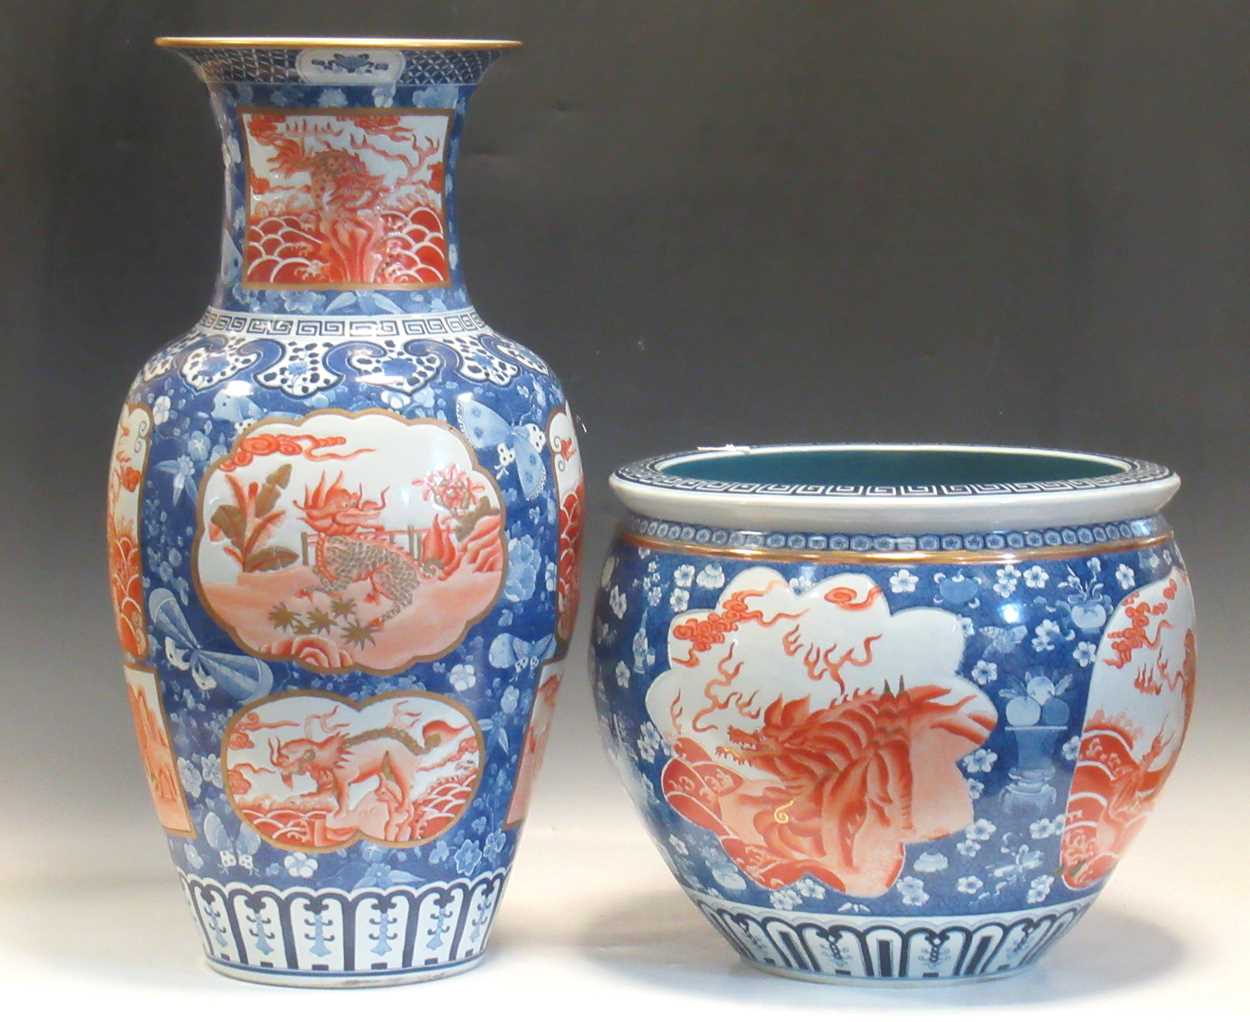 A large modern Chinese vase, 70cm high, and a fish bowl decorated with garden landscapes, 37cm